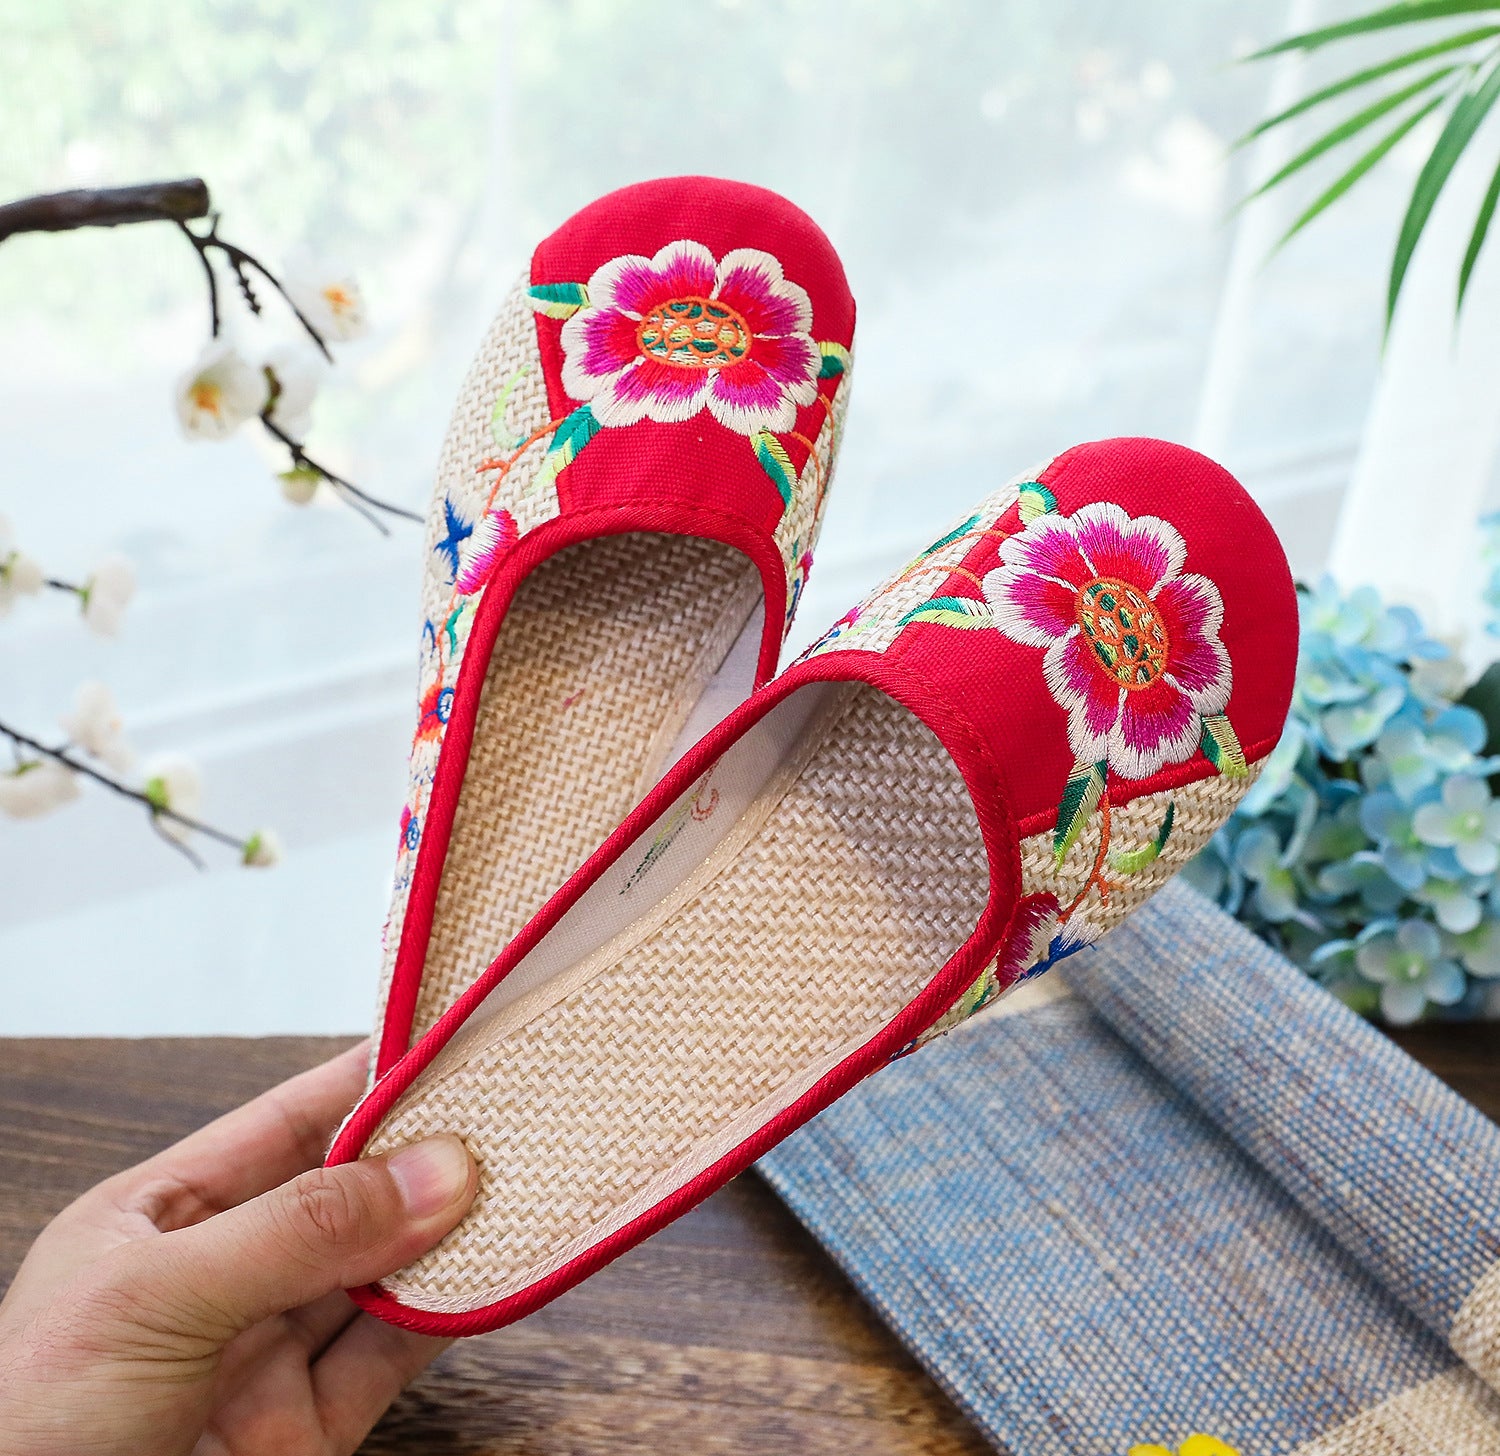 Women's Cloth Shoes Toe Cap Slippers Casual Summer